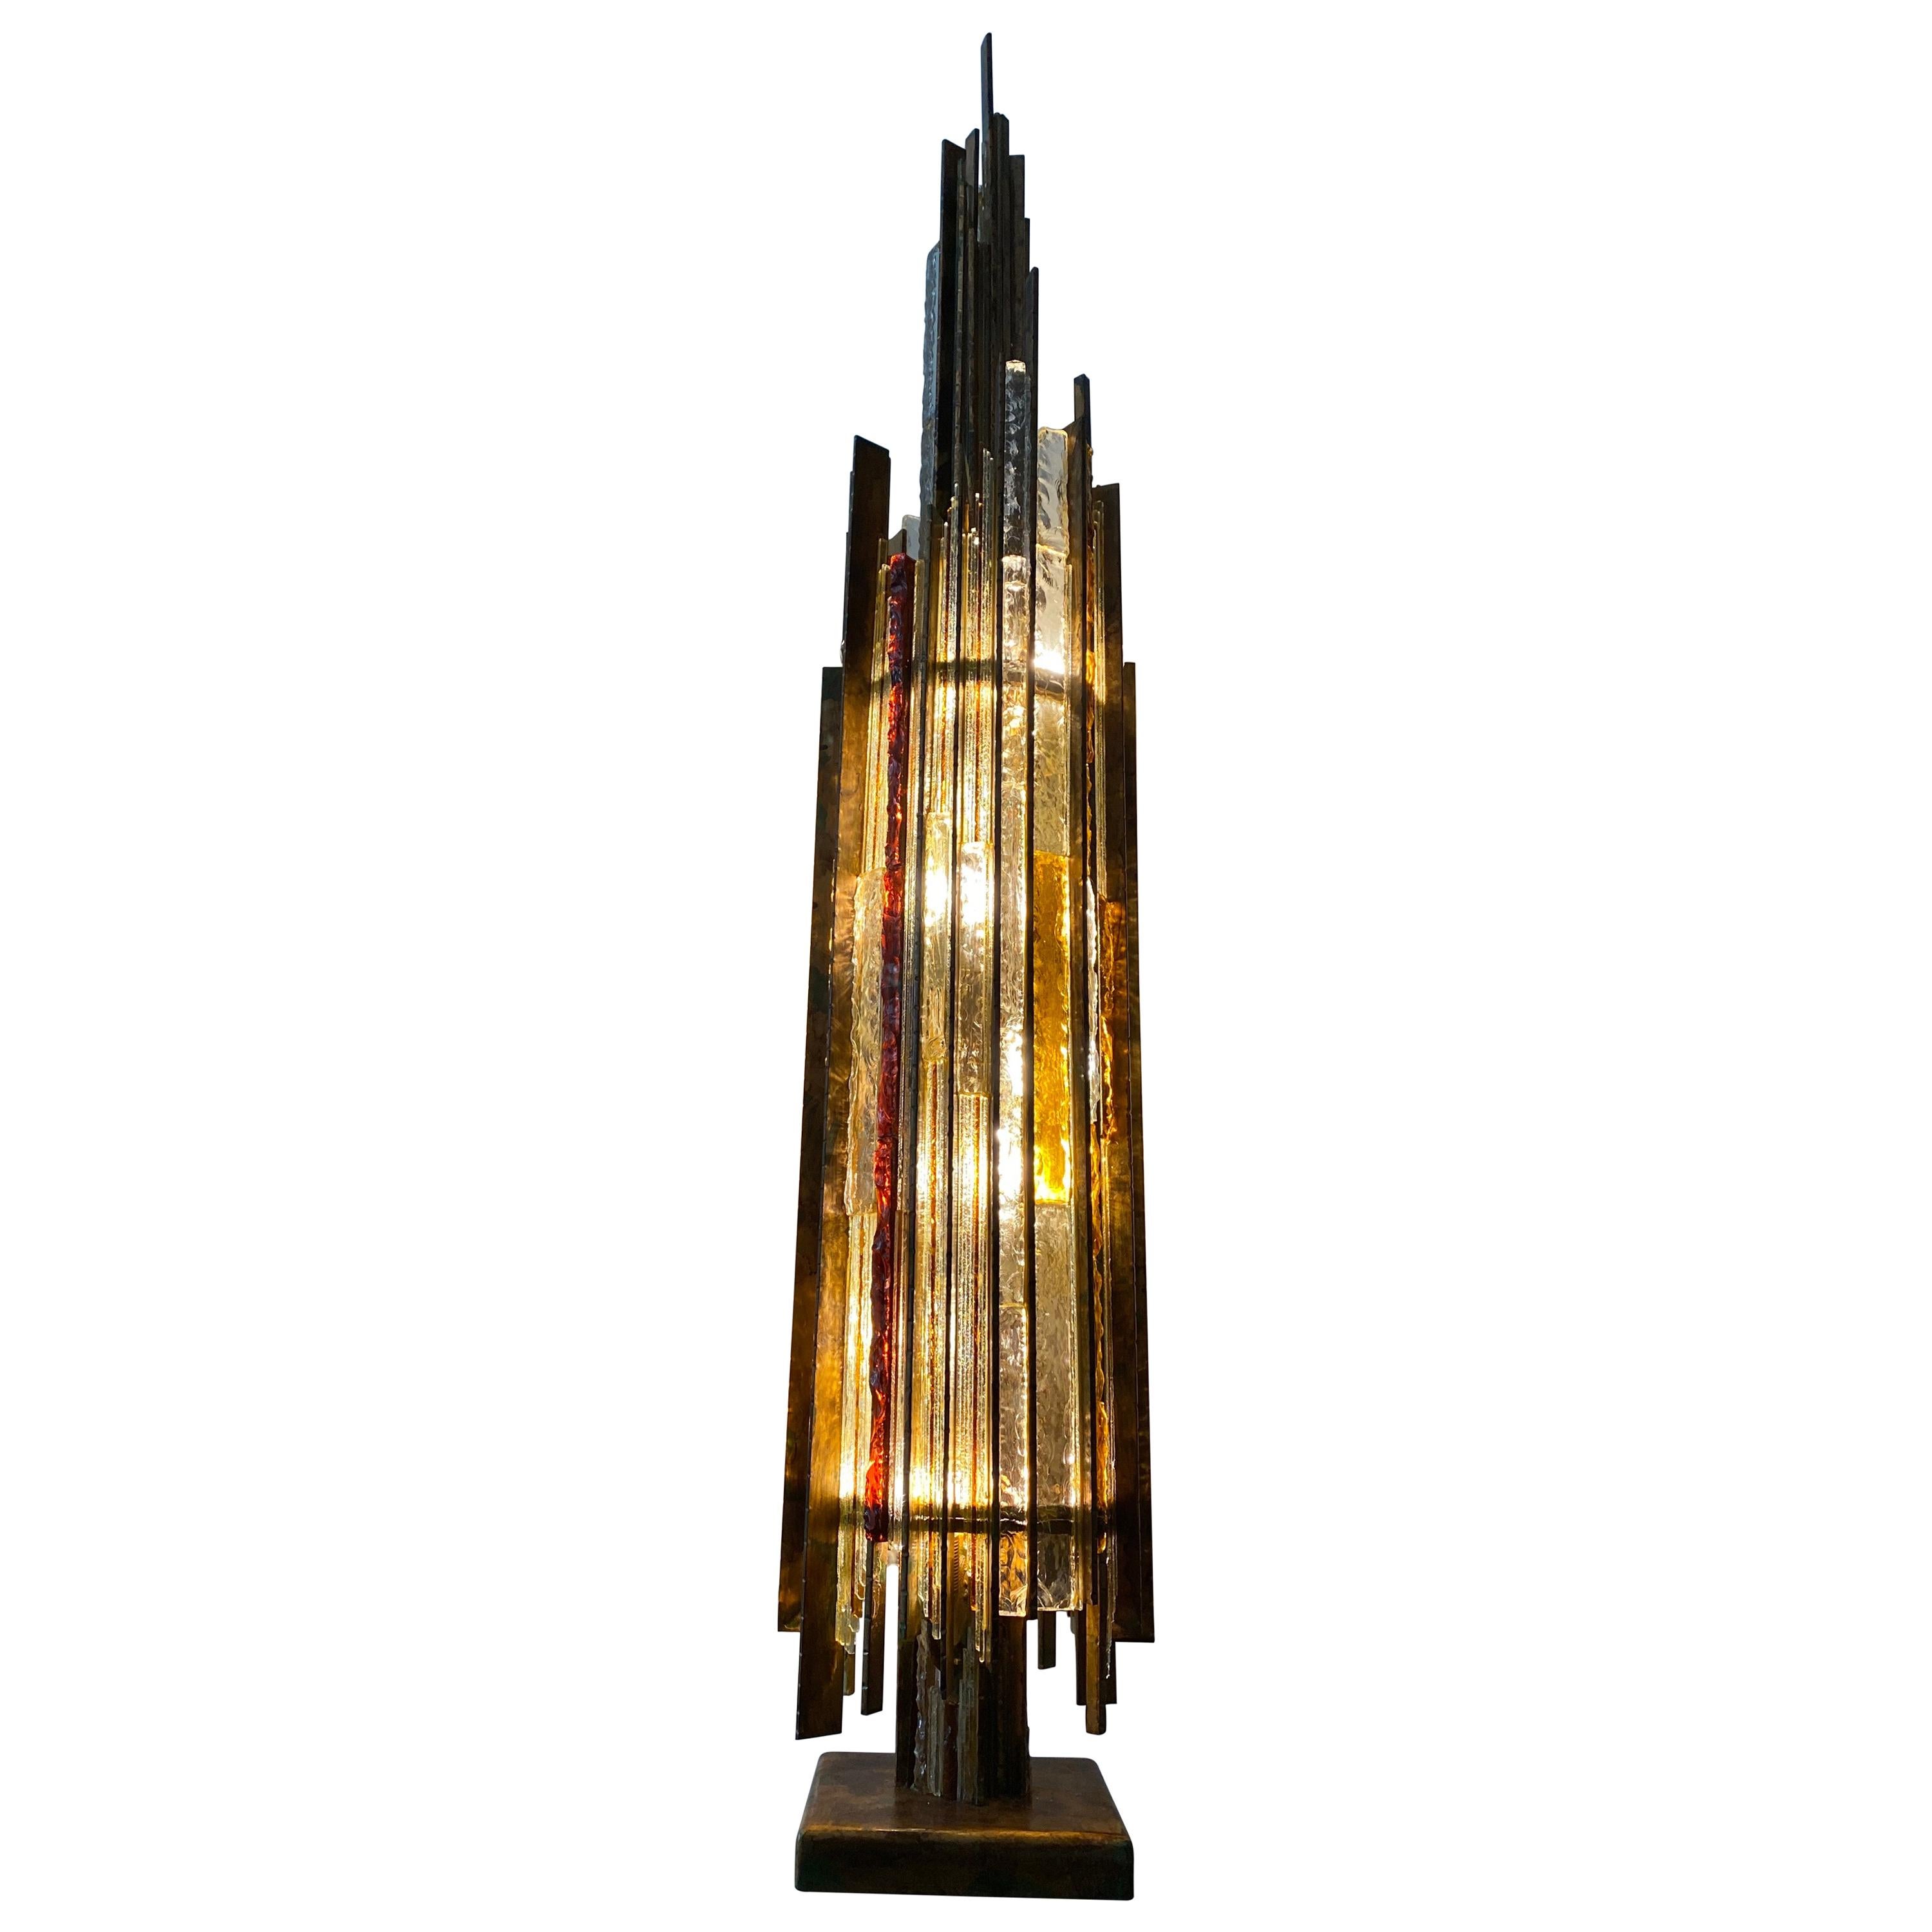 Poliarte Brutalist Bronze and Glass Life-Size Floor Lamp, 1970s by Albano Poli For Sale